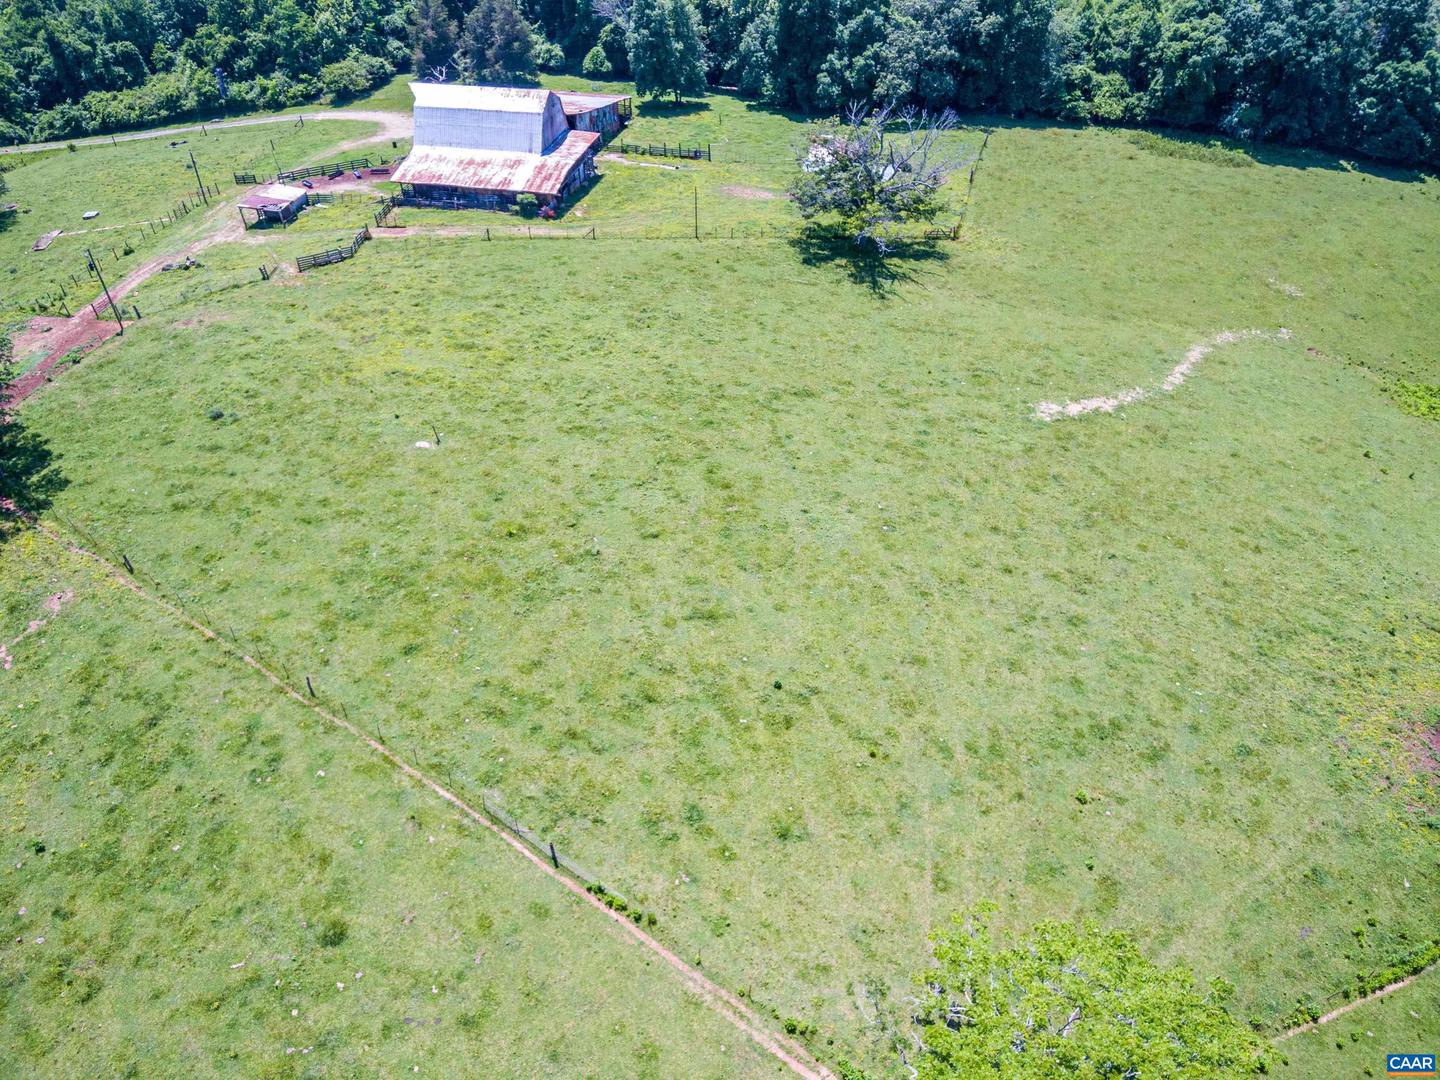 2350 S AMHERST HWY #TRACT 1, AMHERST, Virginia 24521, ,Farm,For sale,2350 S AMHERST HWY #TRACT 1,631959 MLS # 631959